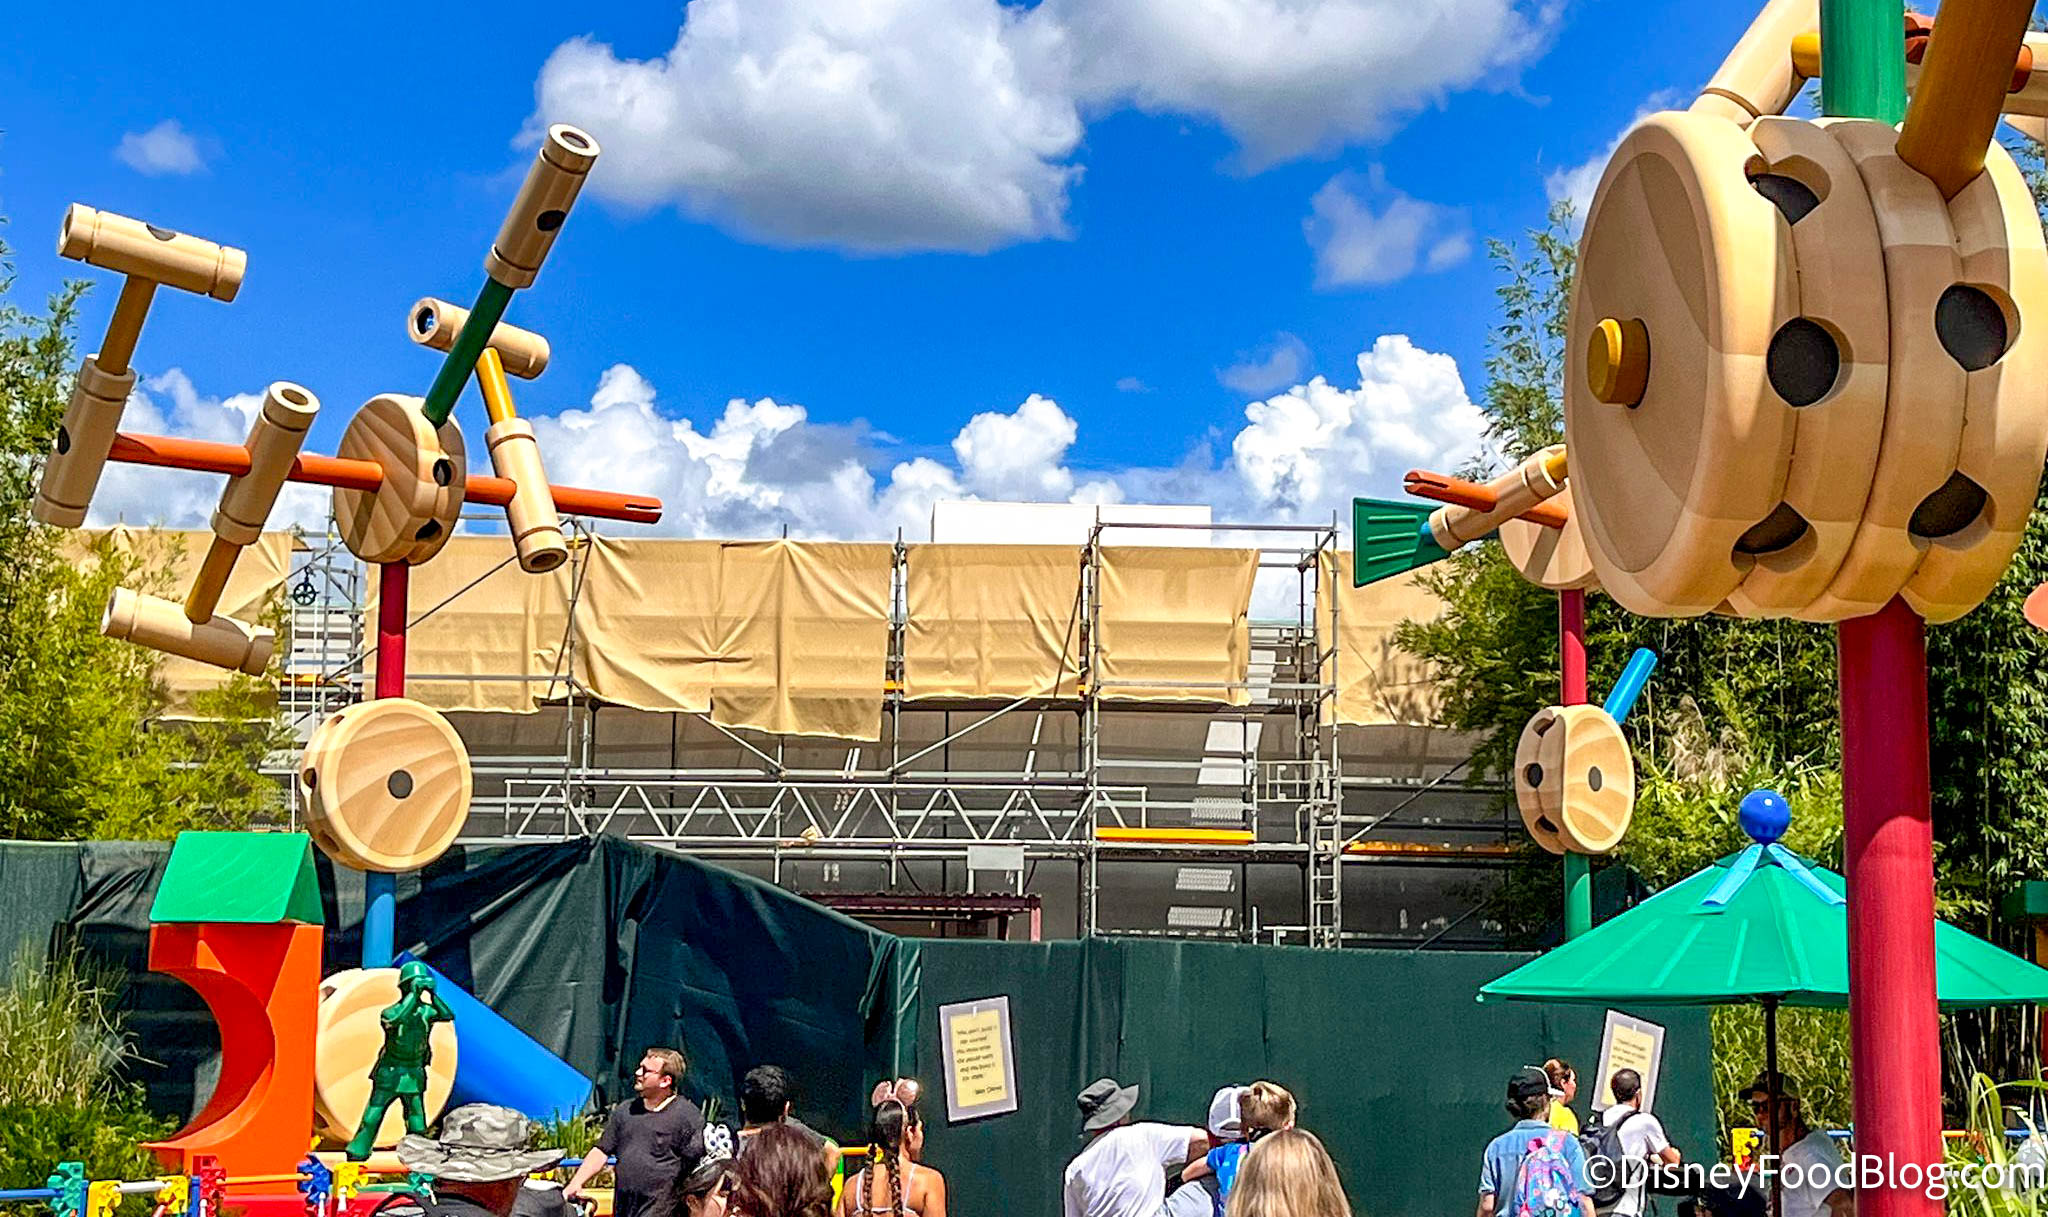 disneyfoodblog.com - Samantha Kendall - Don't MISS These Disney World Construction Updates Before Your Next Visit